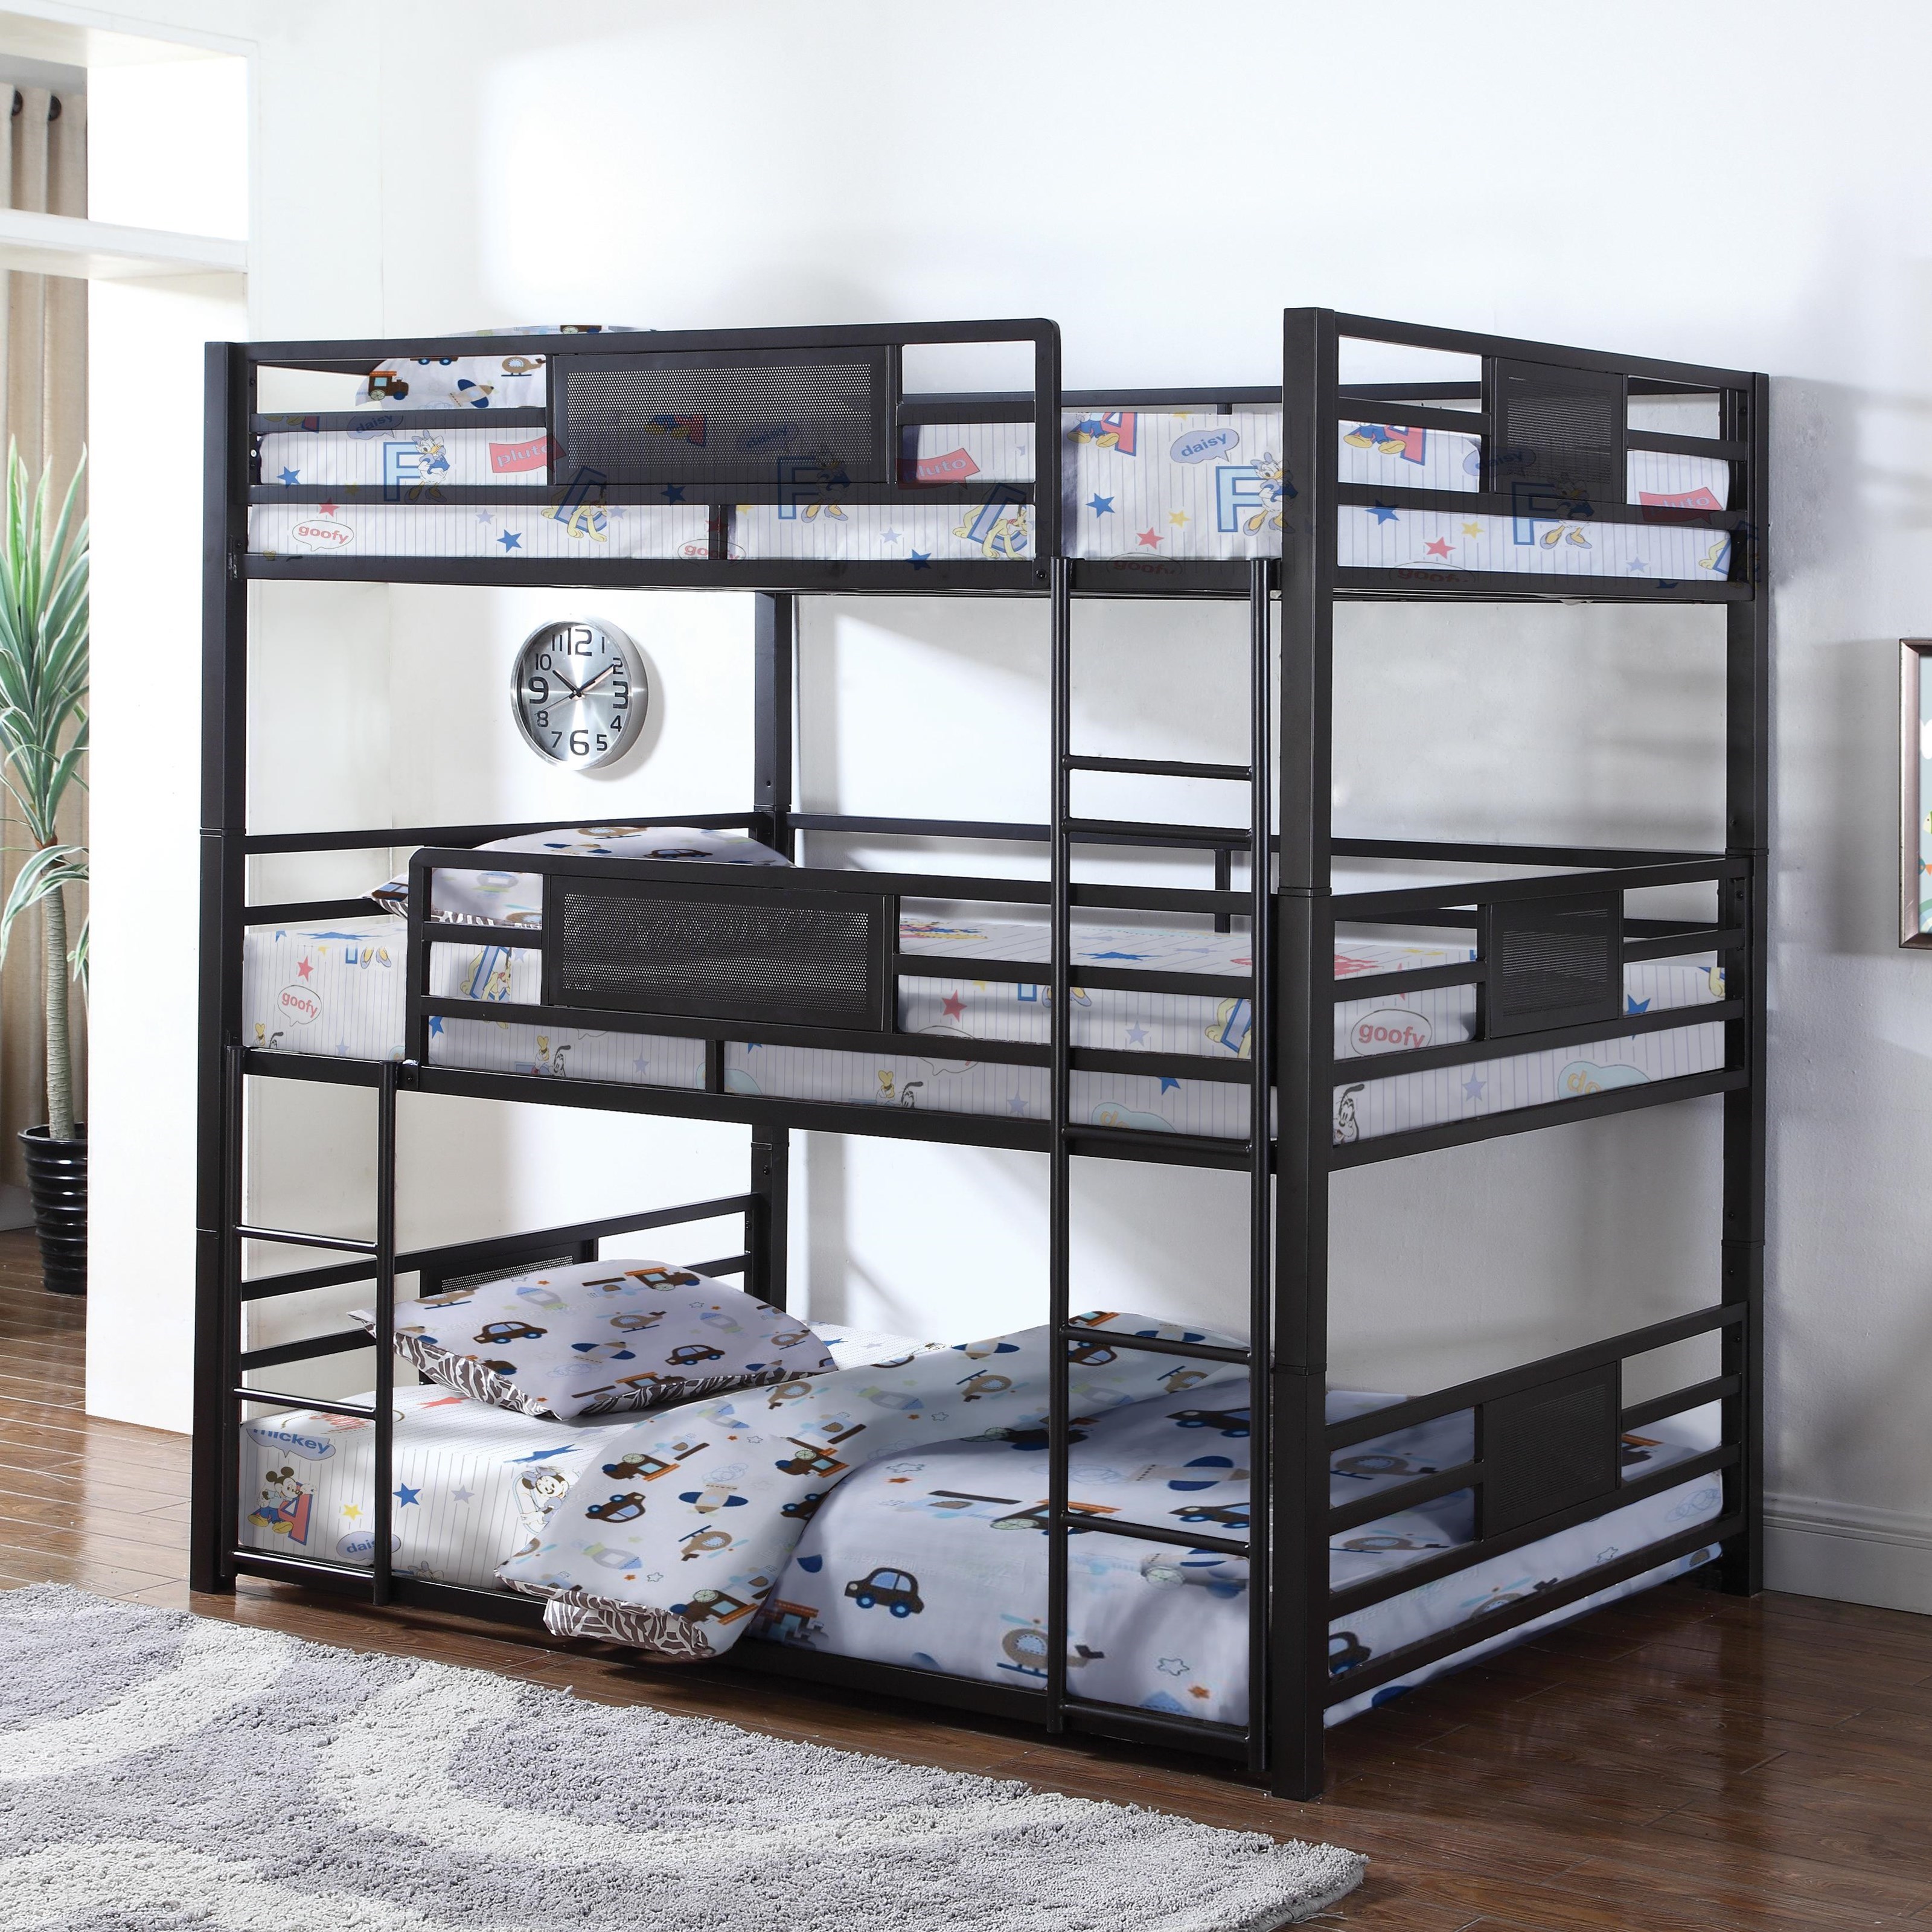 triple bunk bed with shelves